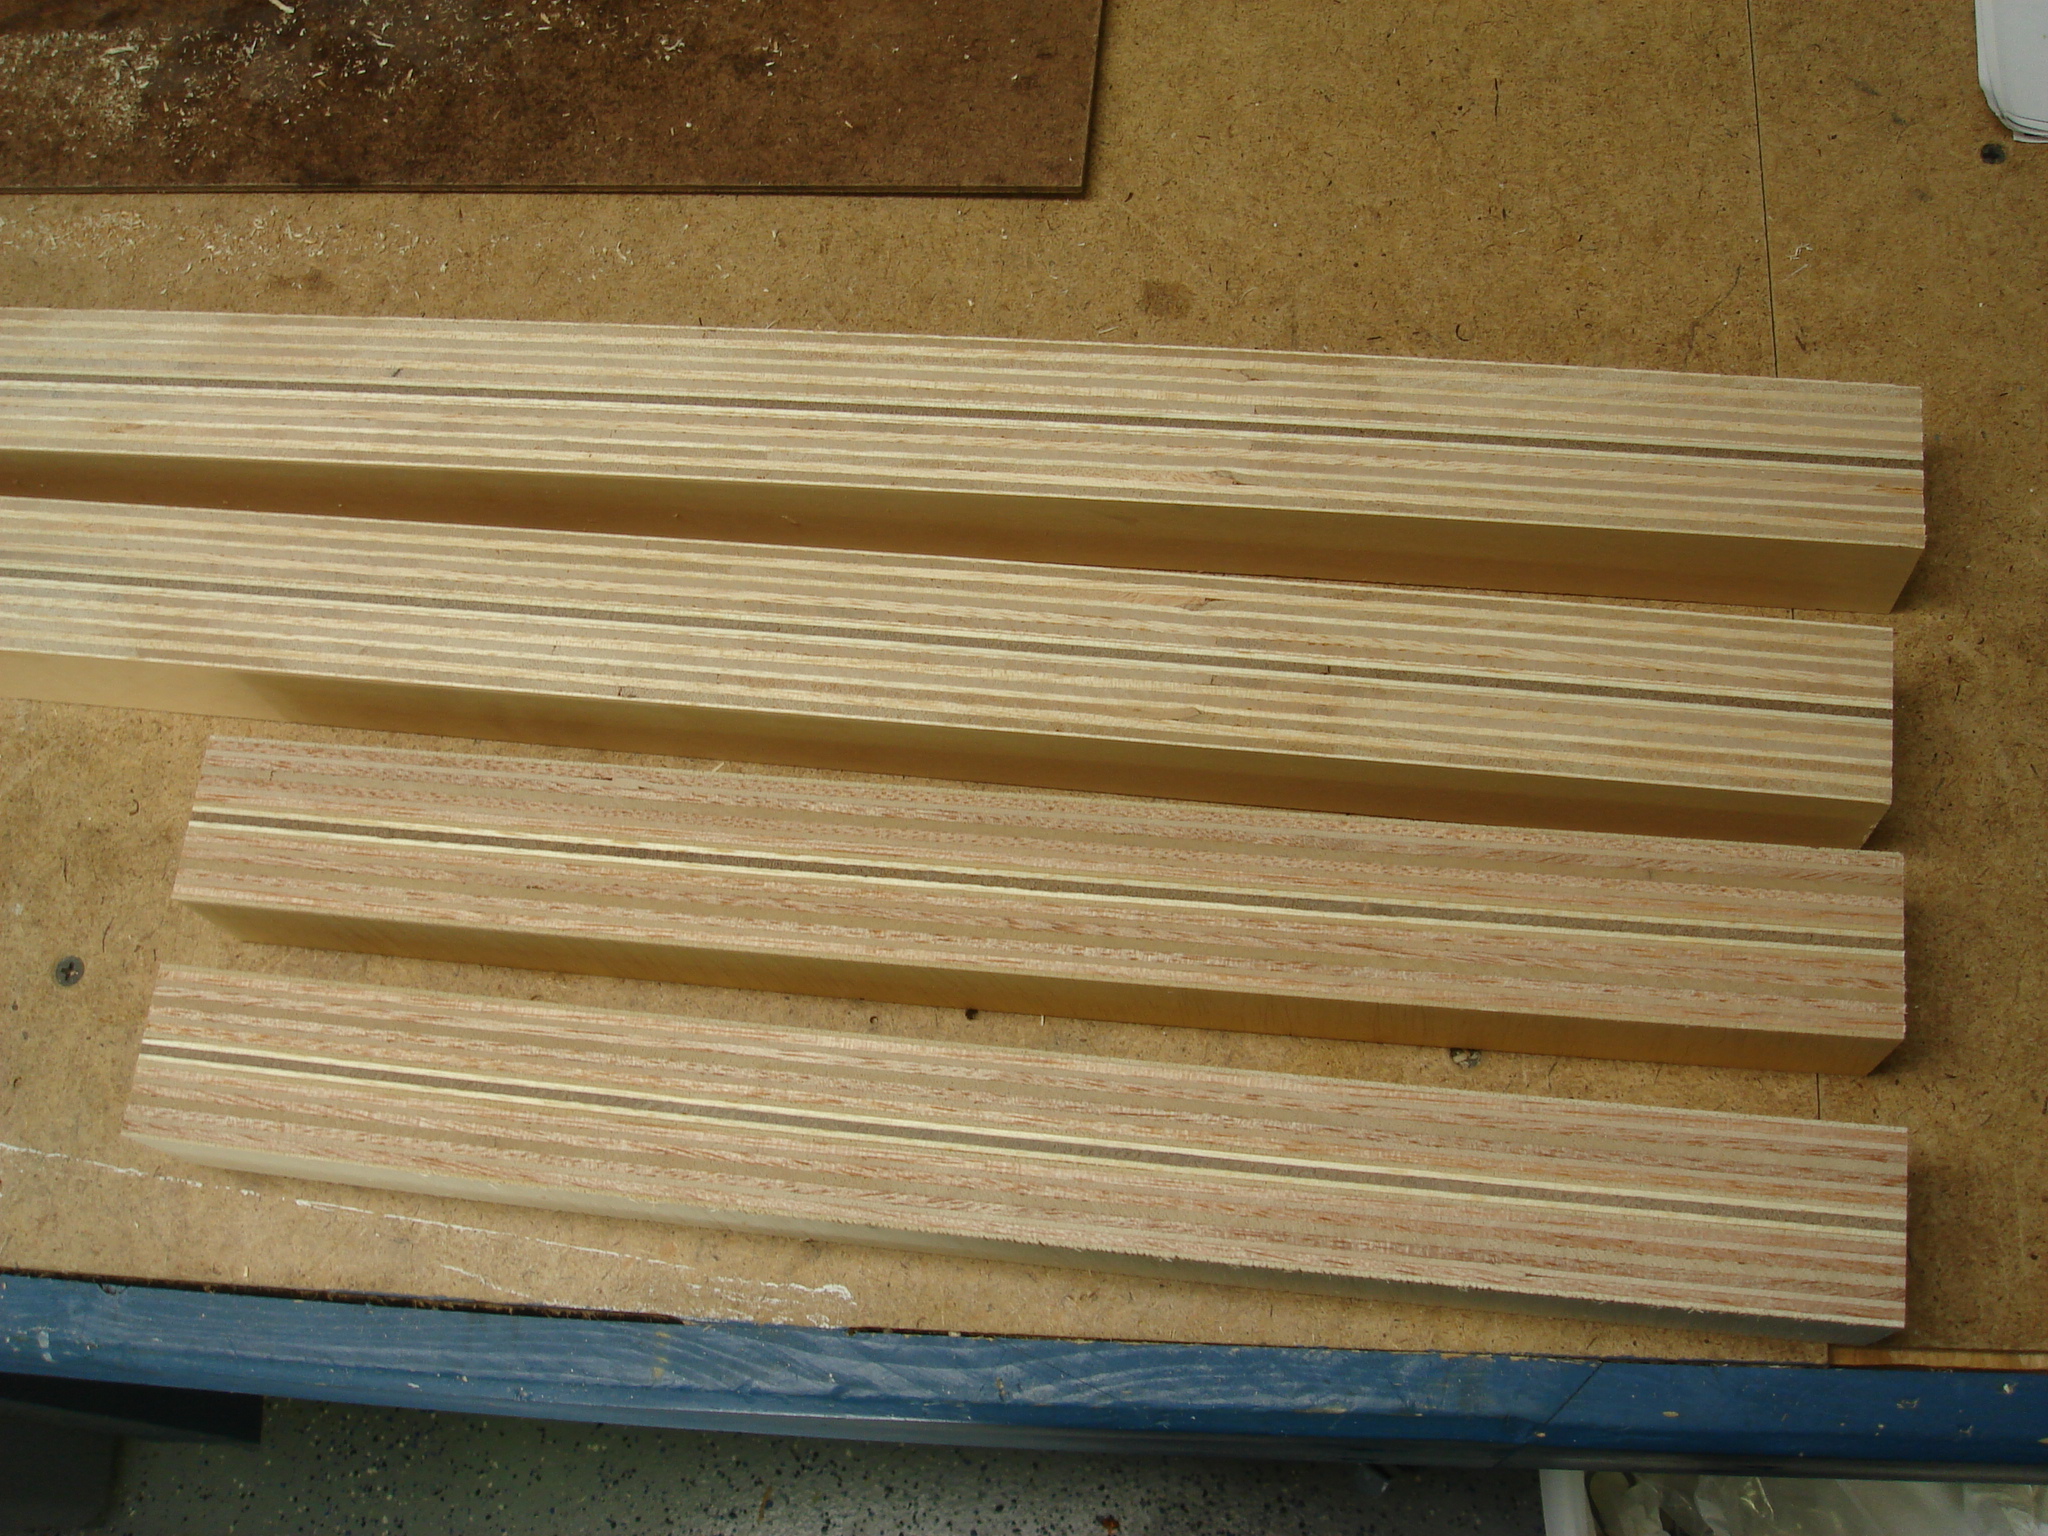 Trimmed laminated plywood stretchers